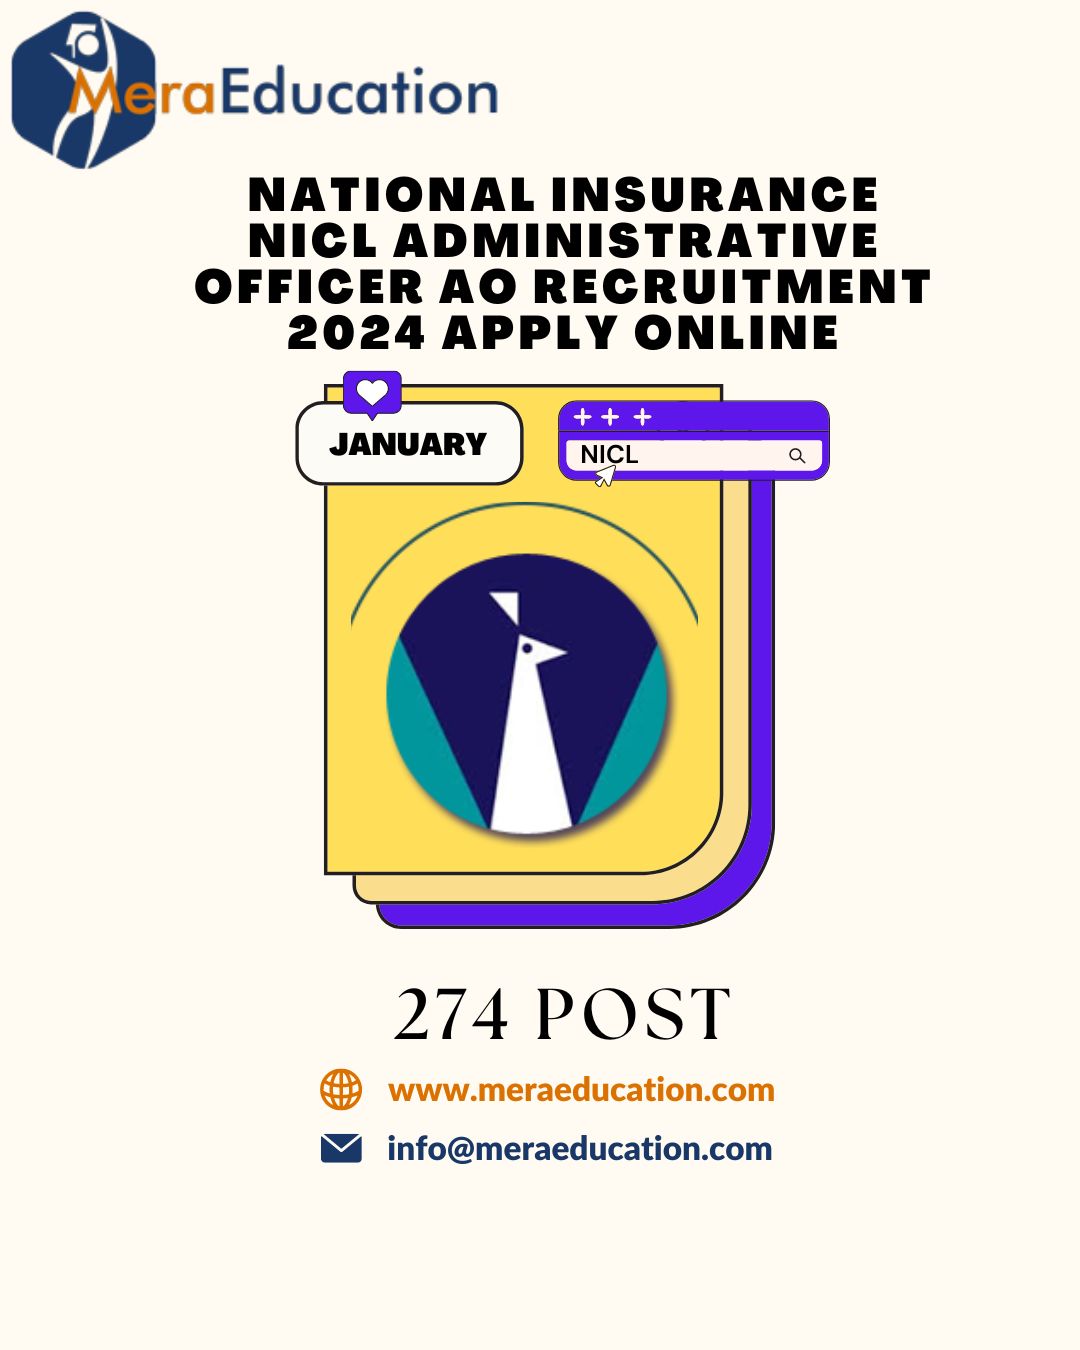 National Insurance NICL Administrative Officer AO Recruitment